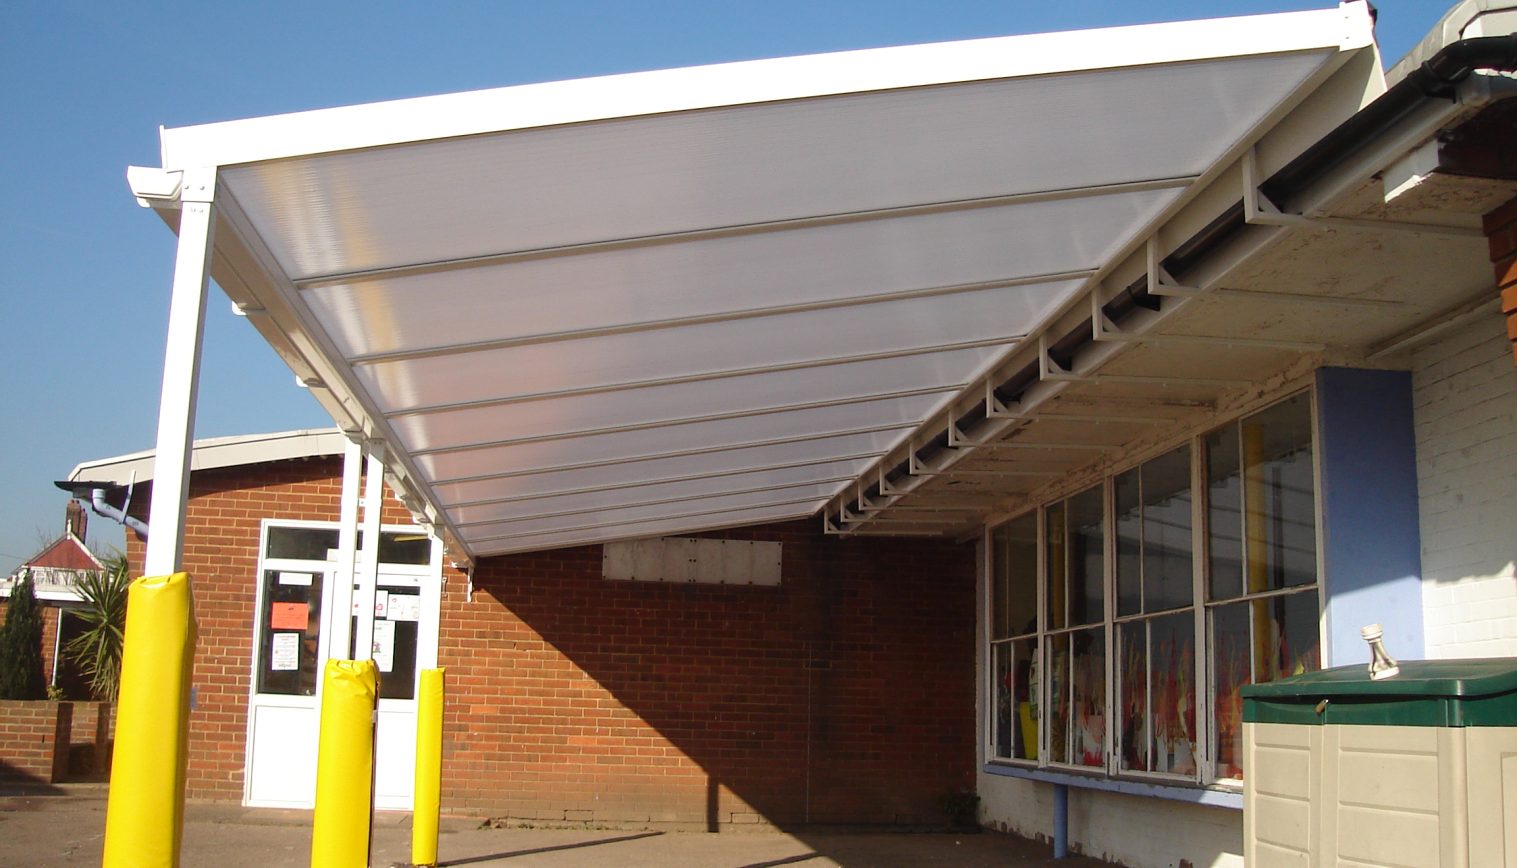 Grove Park Primary School – 2nd Wall mounted canopy